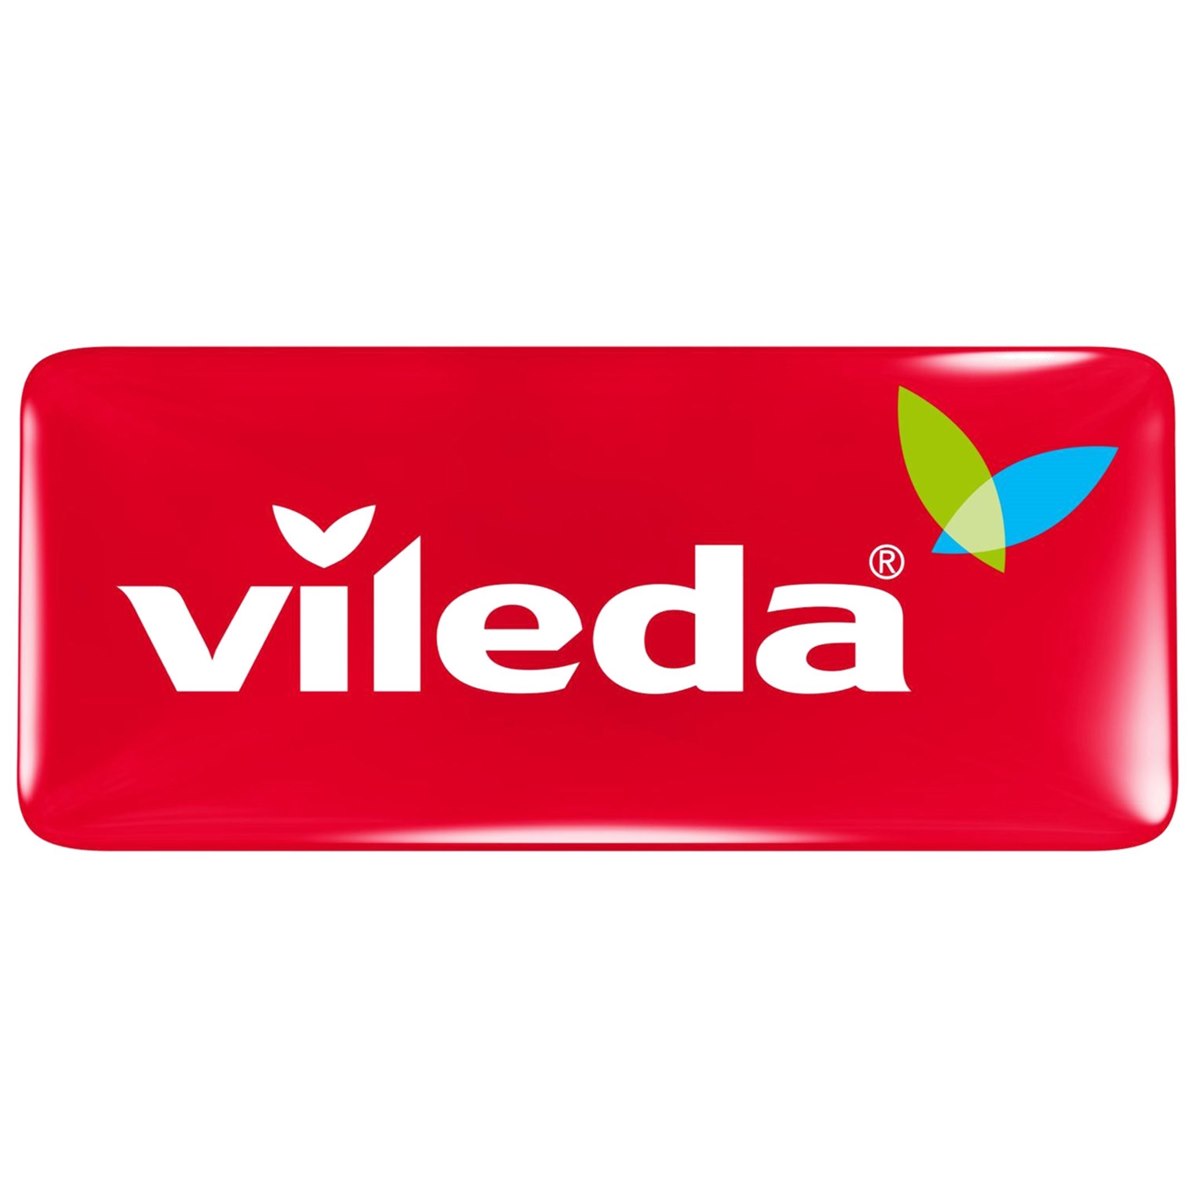 Where to Buy Vileda Products